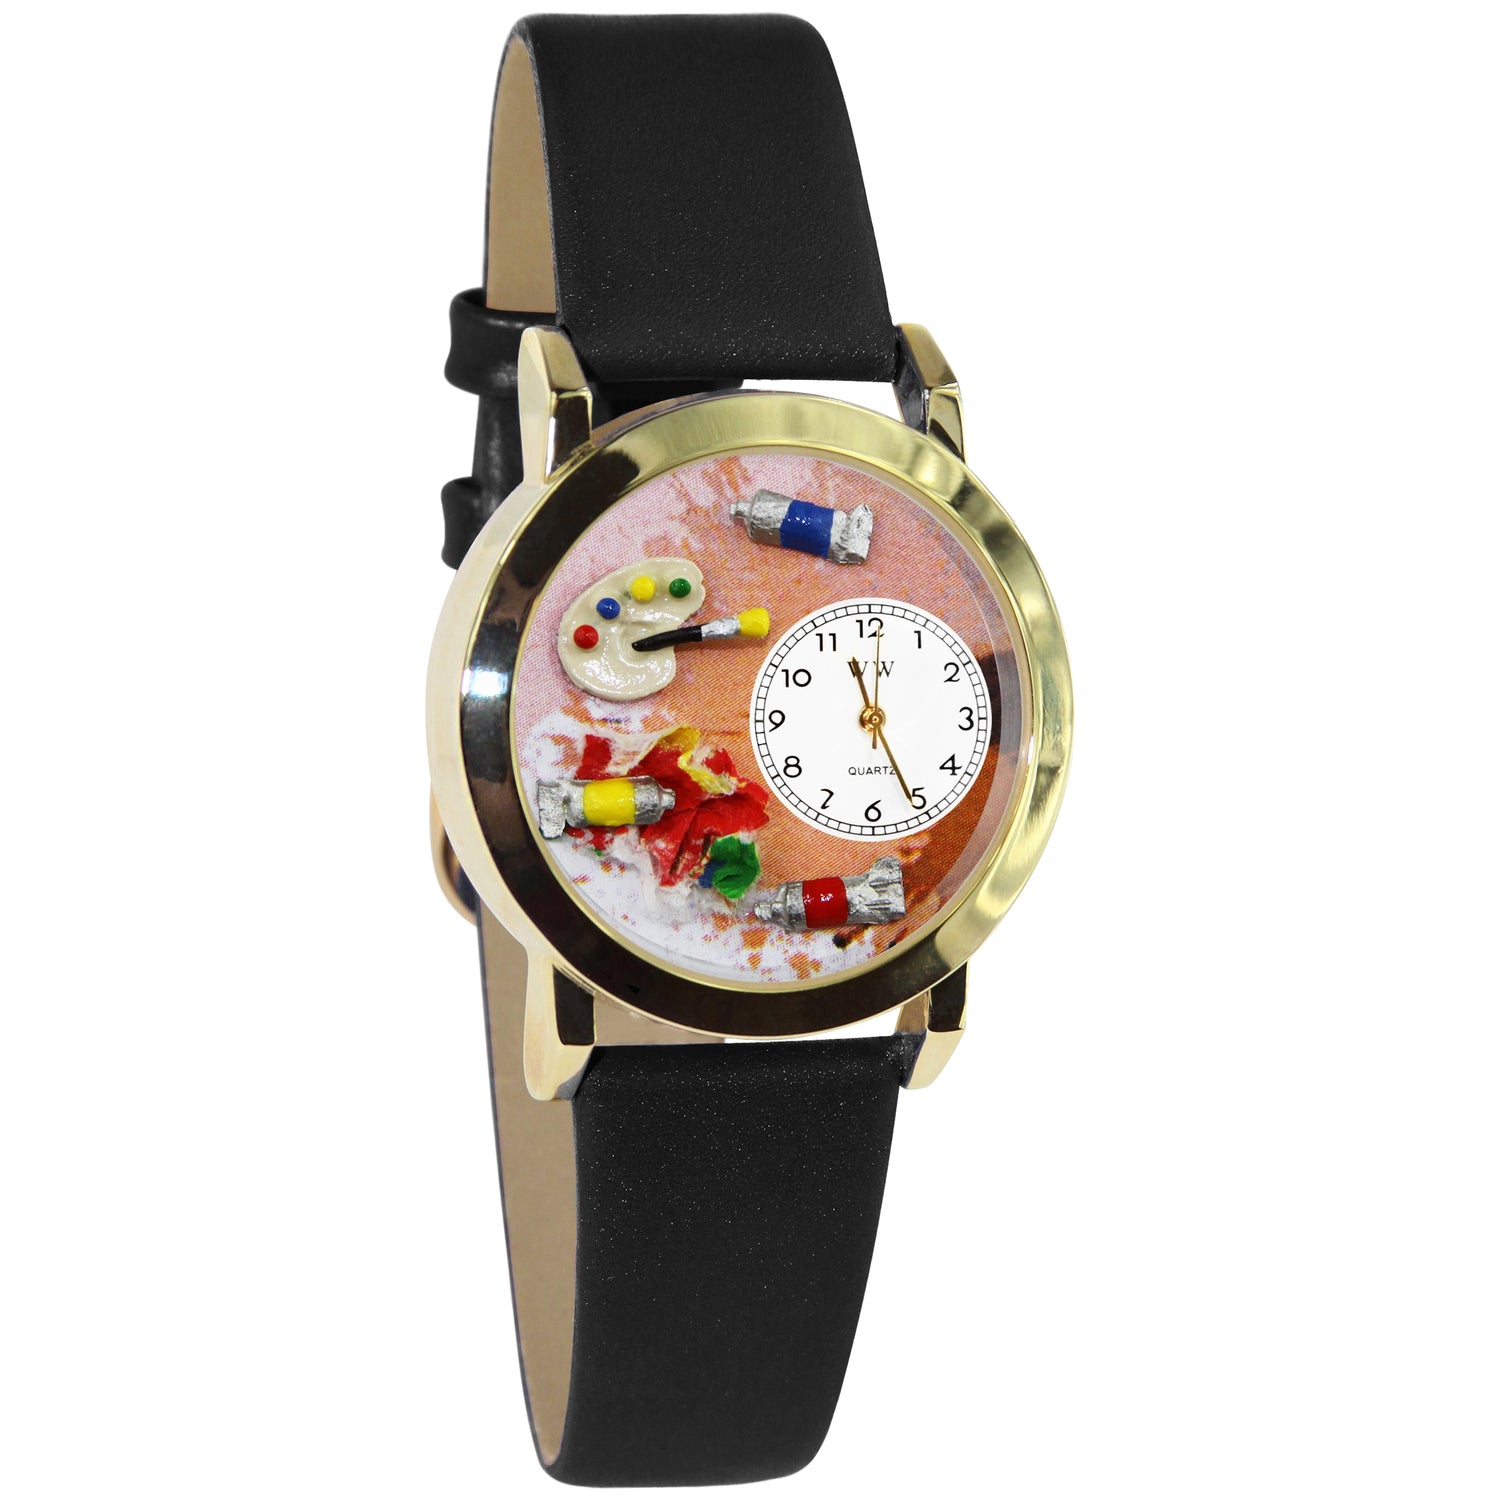 Whimsical Gifts | Artist Palette 3D Watch Small Style | Handmade in USA | Artist |  | Novelty Unique Fun Miniatures Gift | Gold Finish Black Leather Watch Band